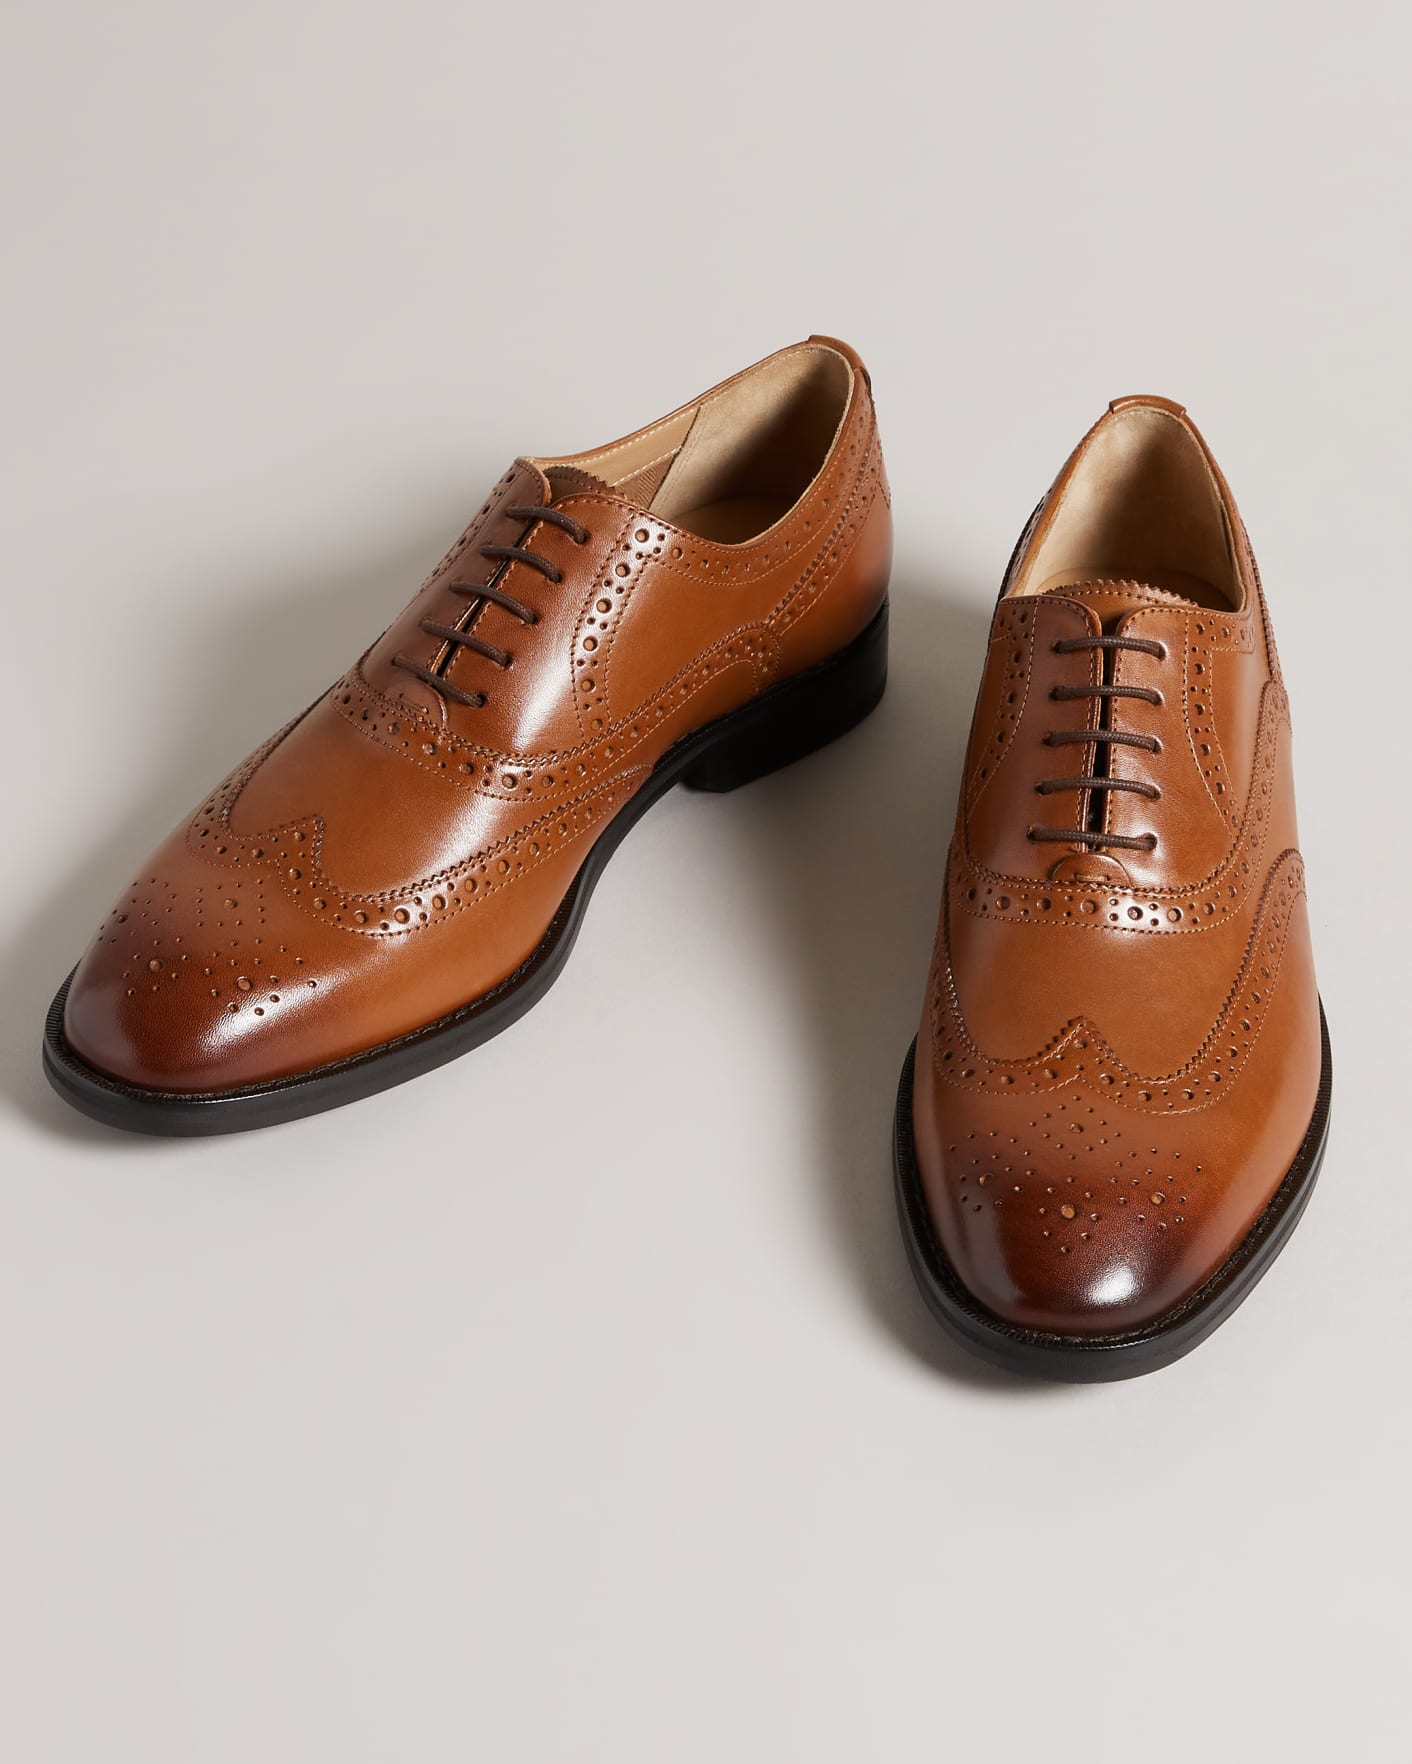 Tan Formal Leather Brogue Shoes Ted Baker